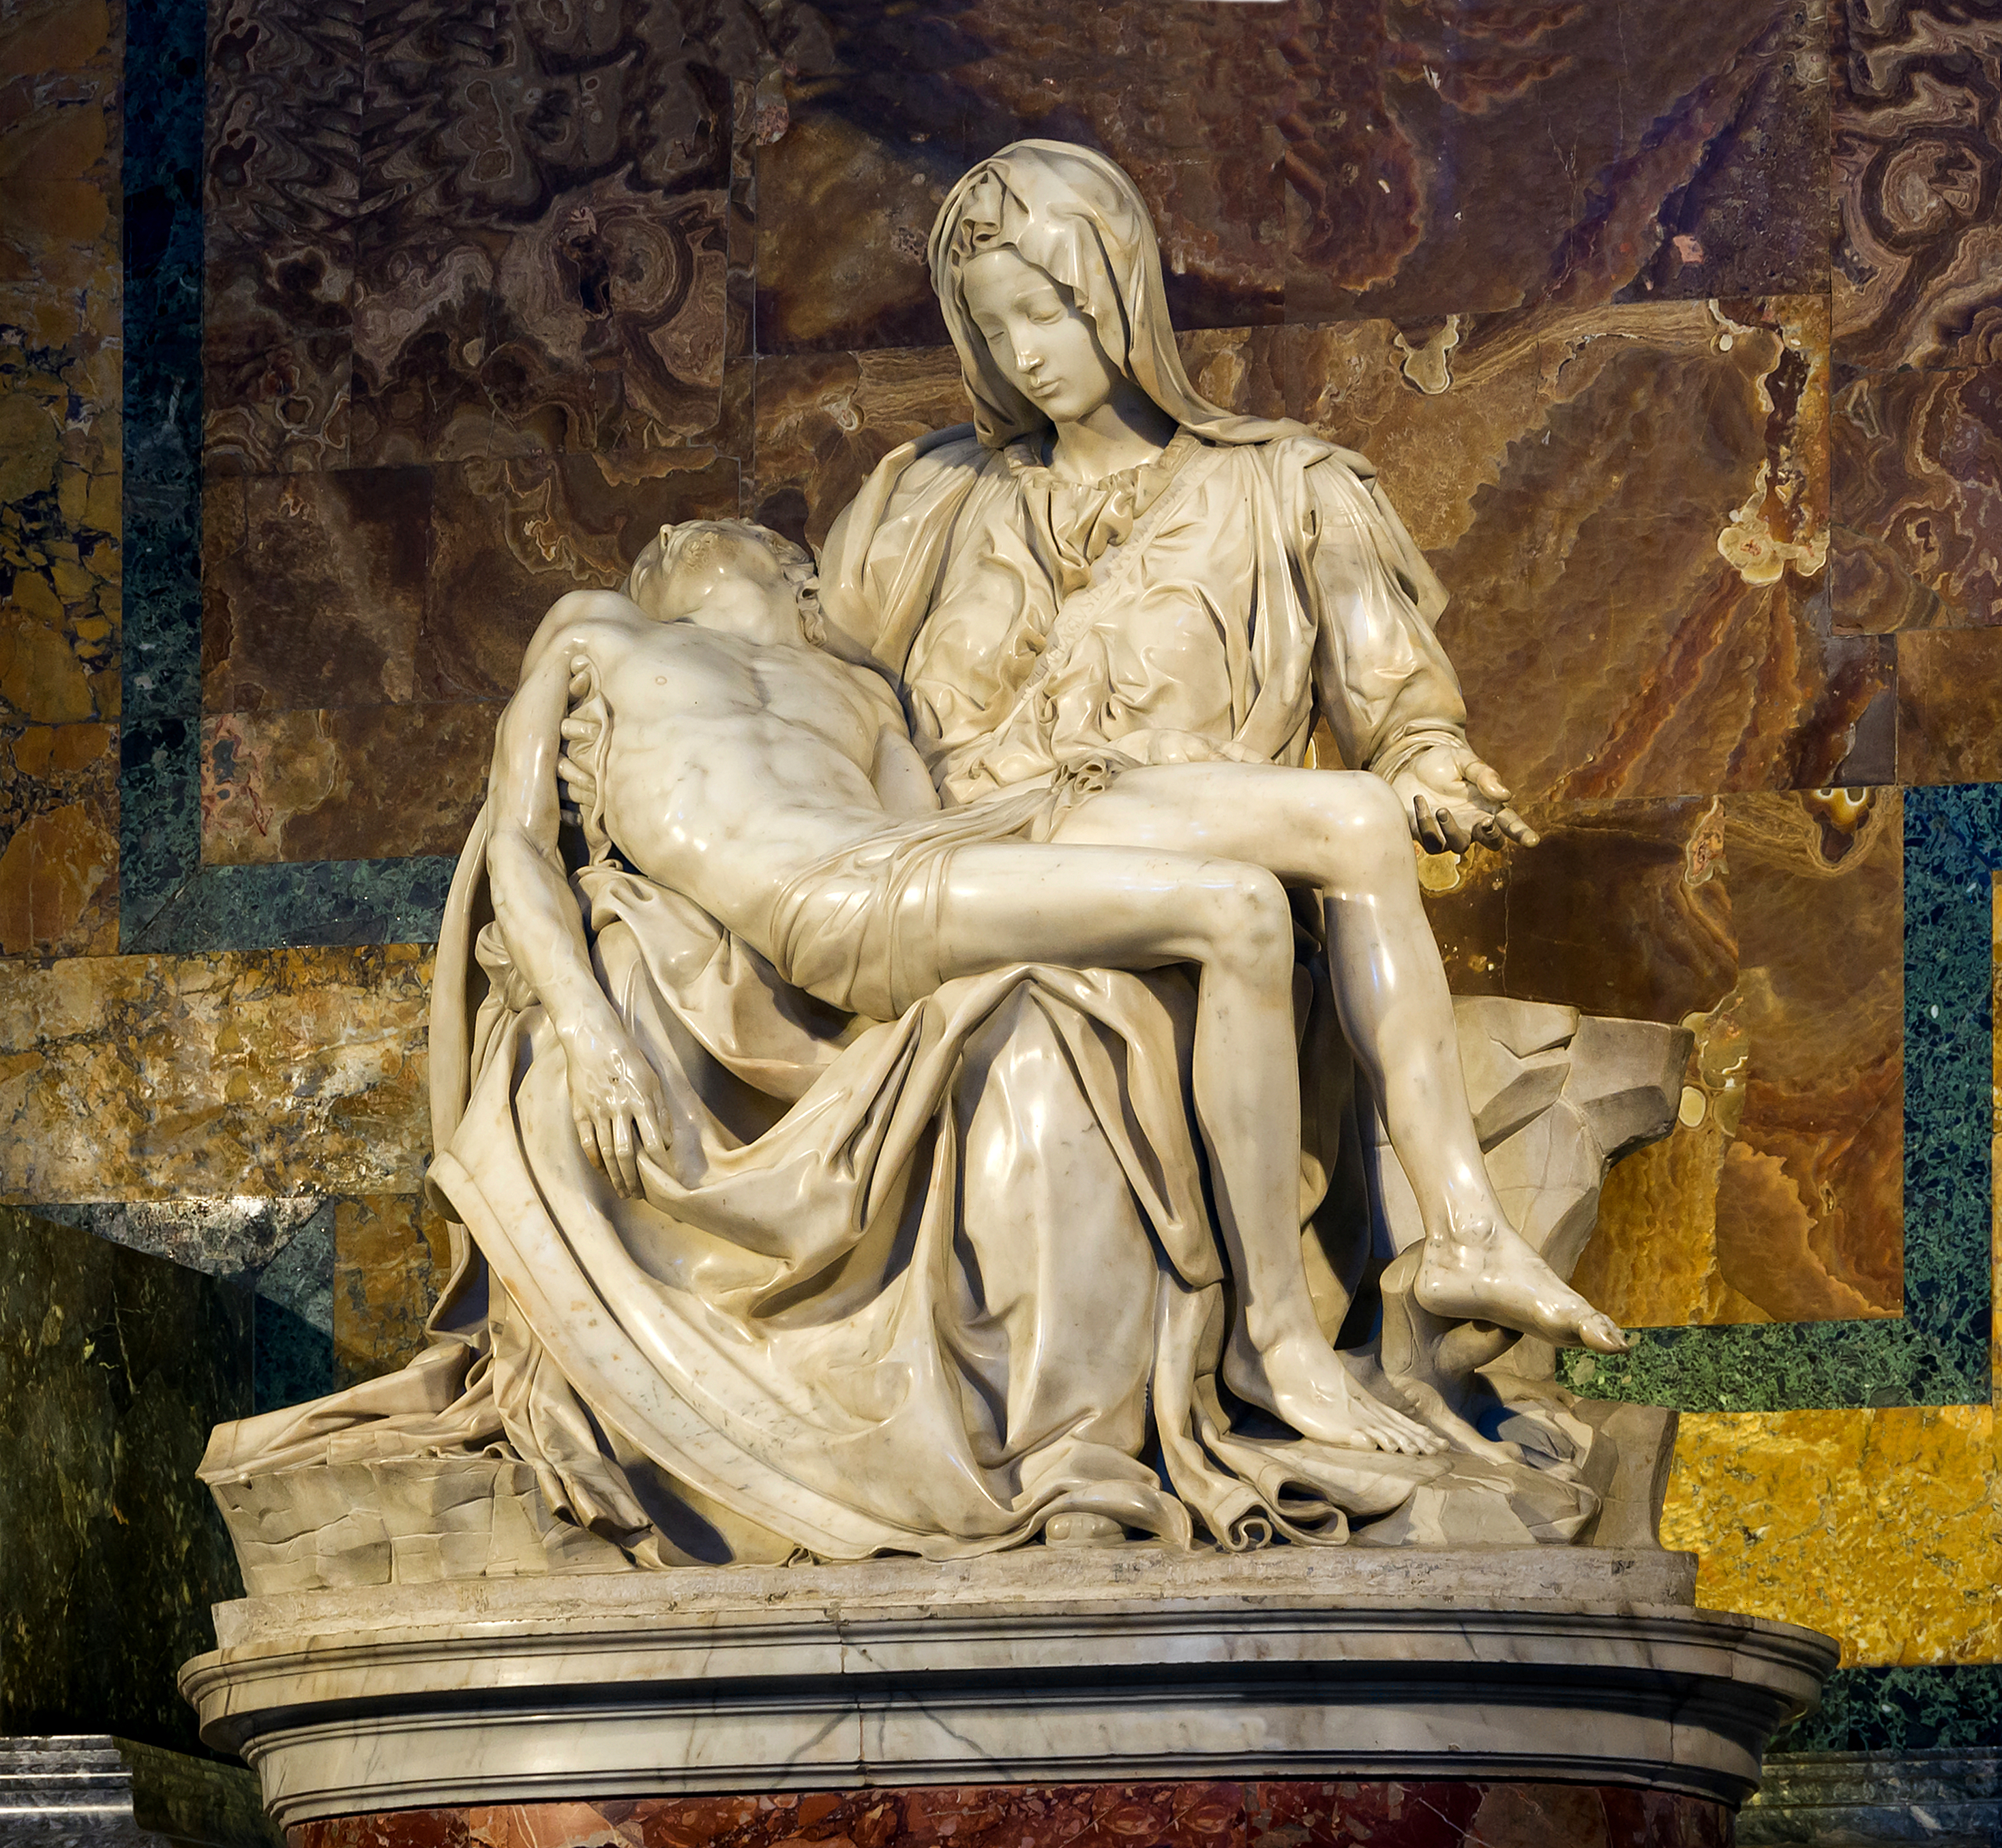 Michelangelo [CC0], from Wikimedia Commons